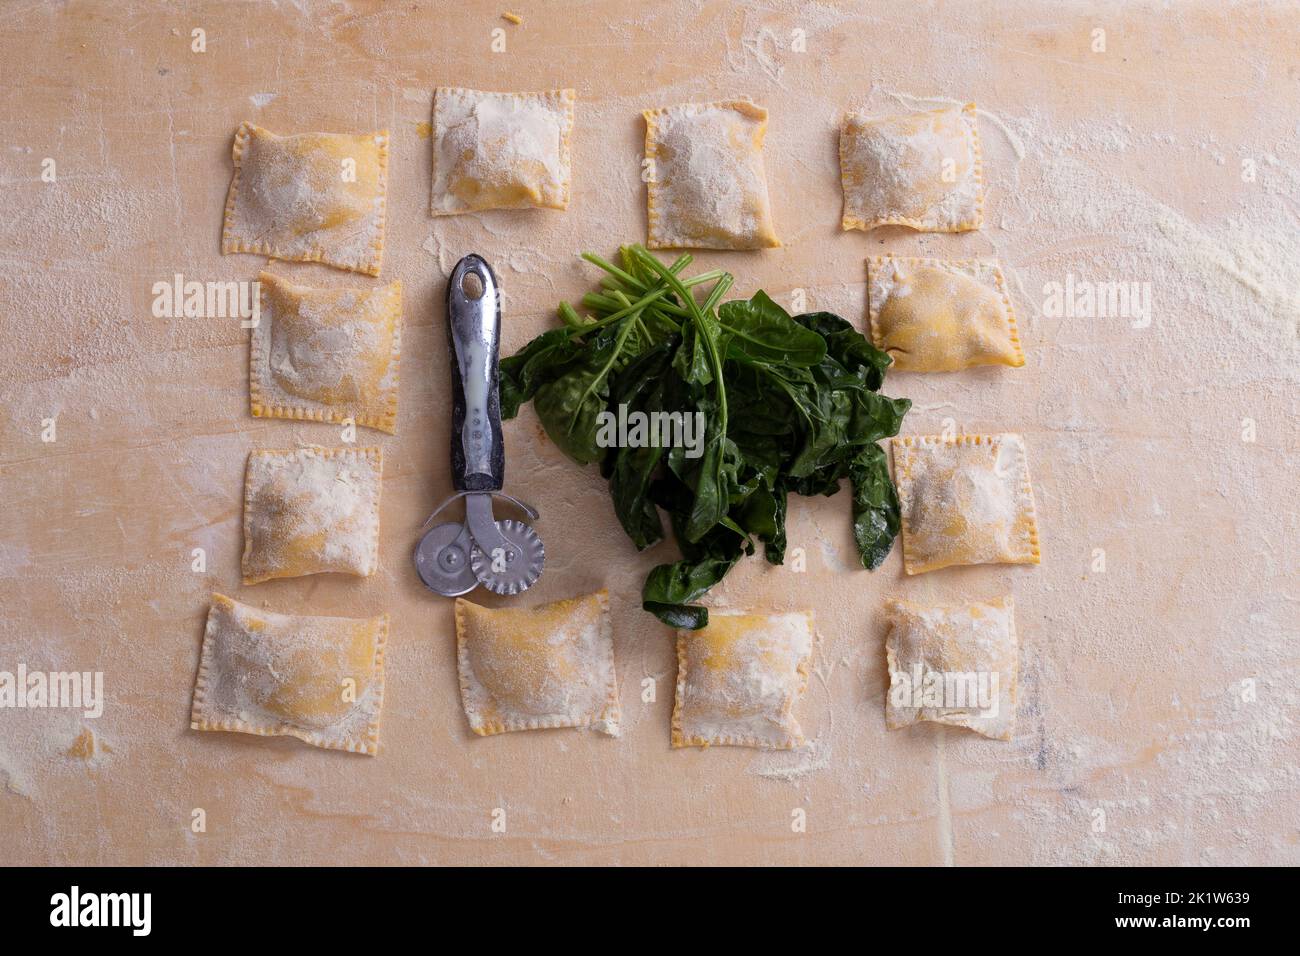 stock and photography hi-res Alamy pasta - Italian - Page images 13 ravioli